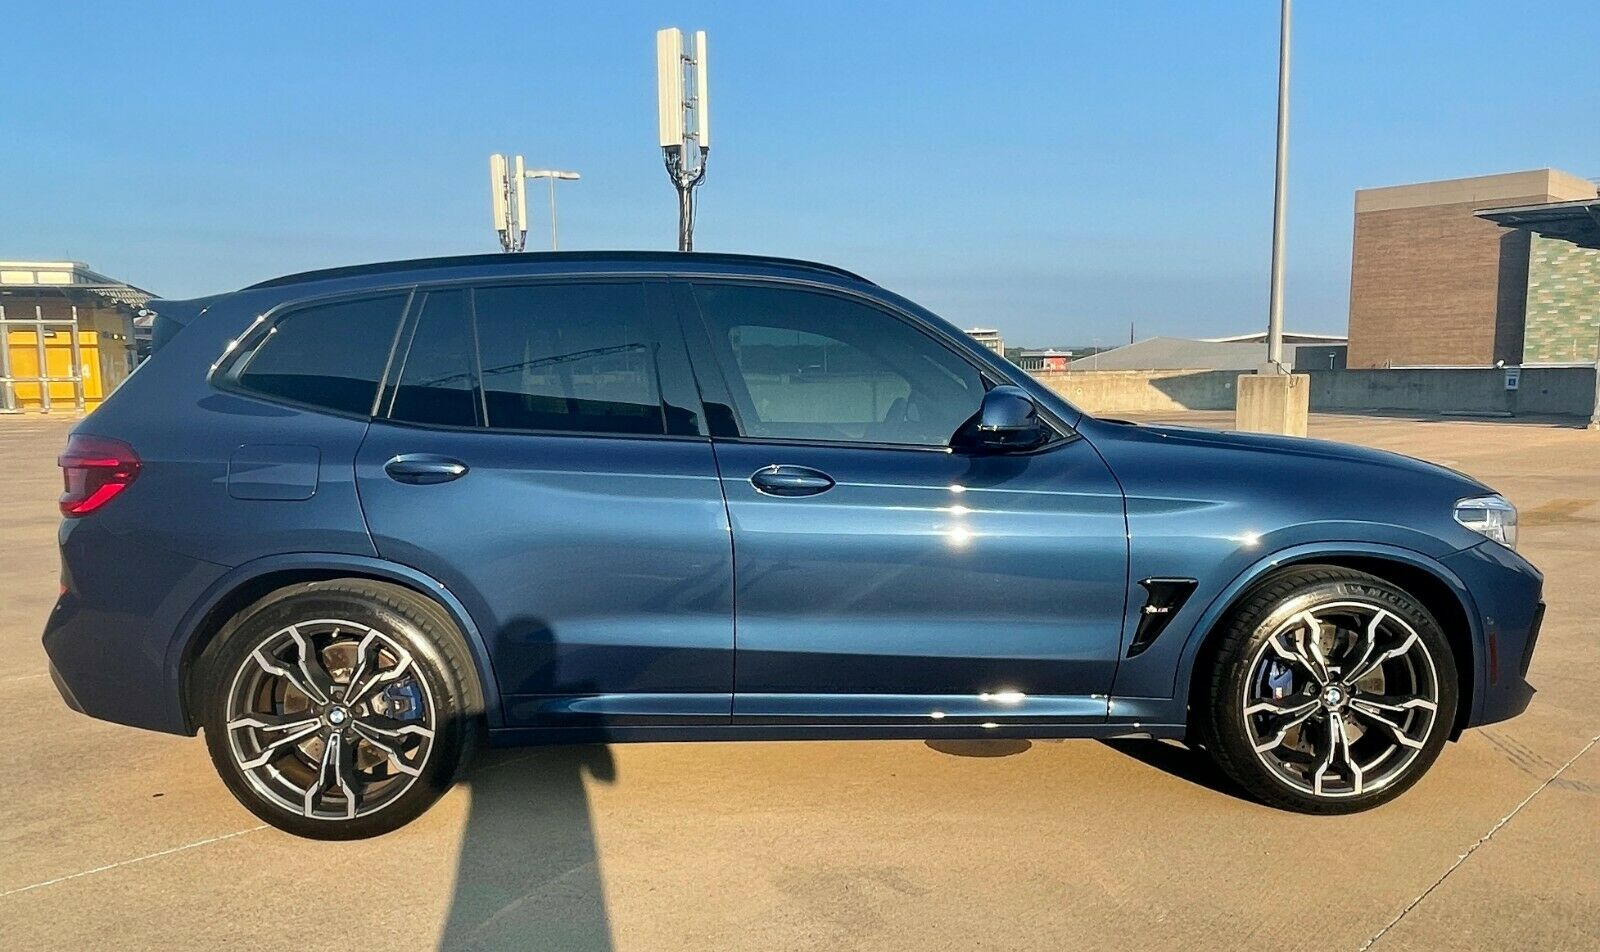 2020 Bmw X3 M Competition This Is The M Series, But Not The Competition (ebay Defaults To This Category)